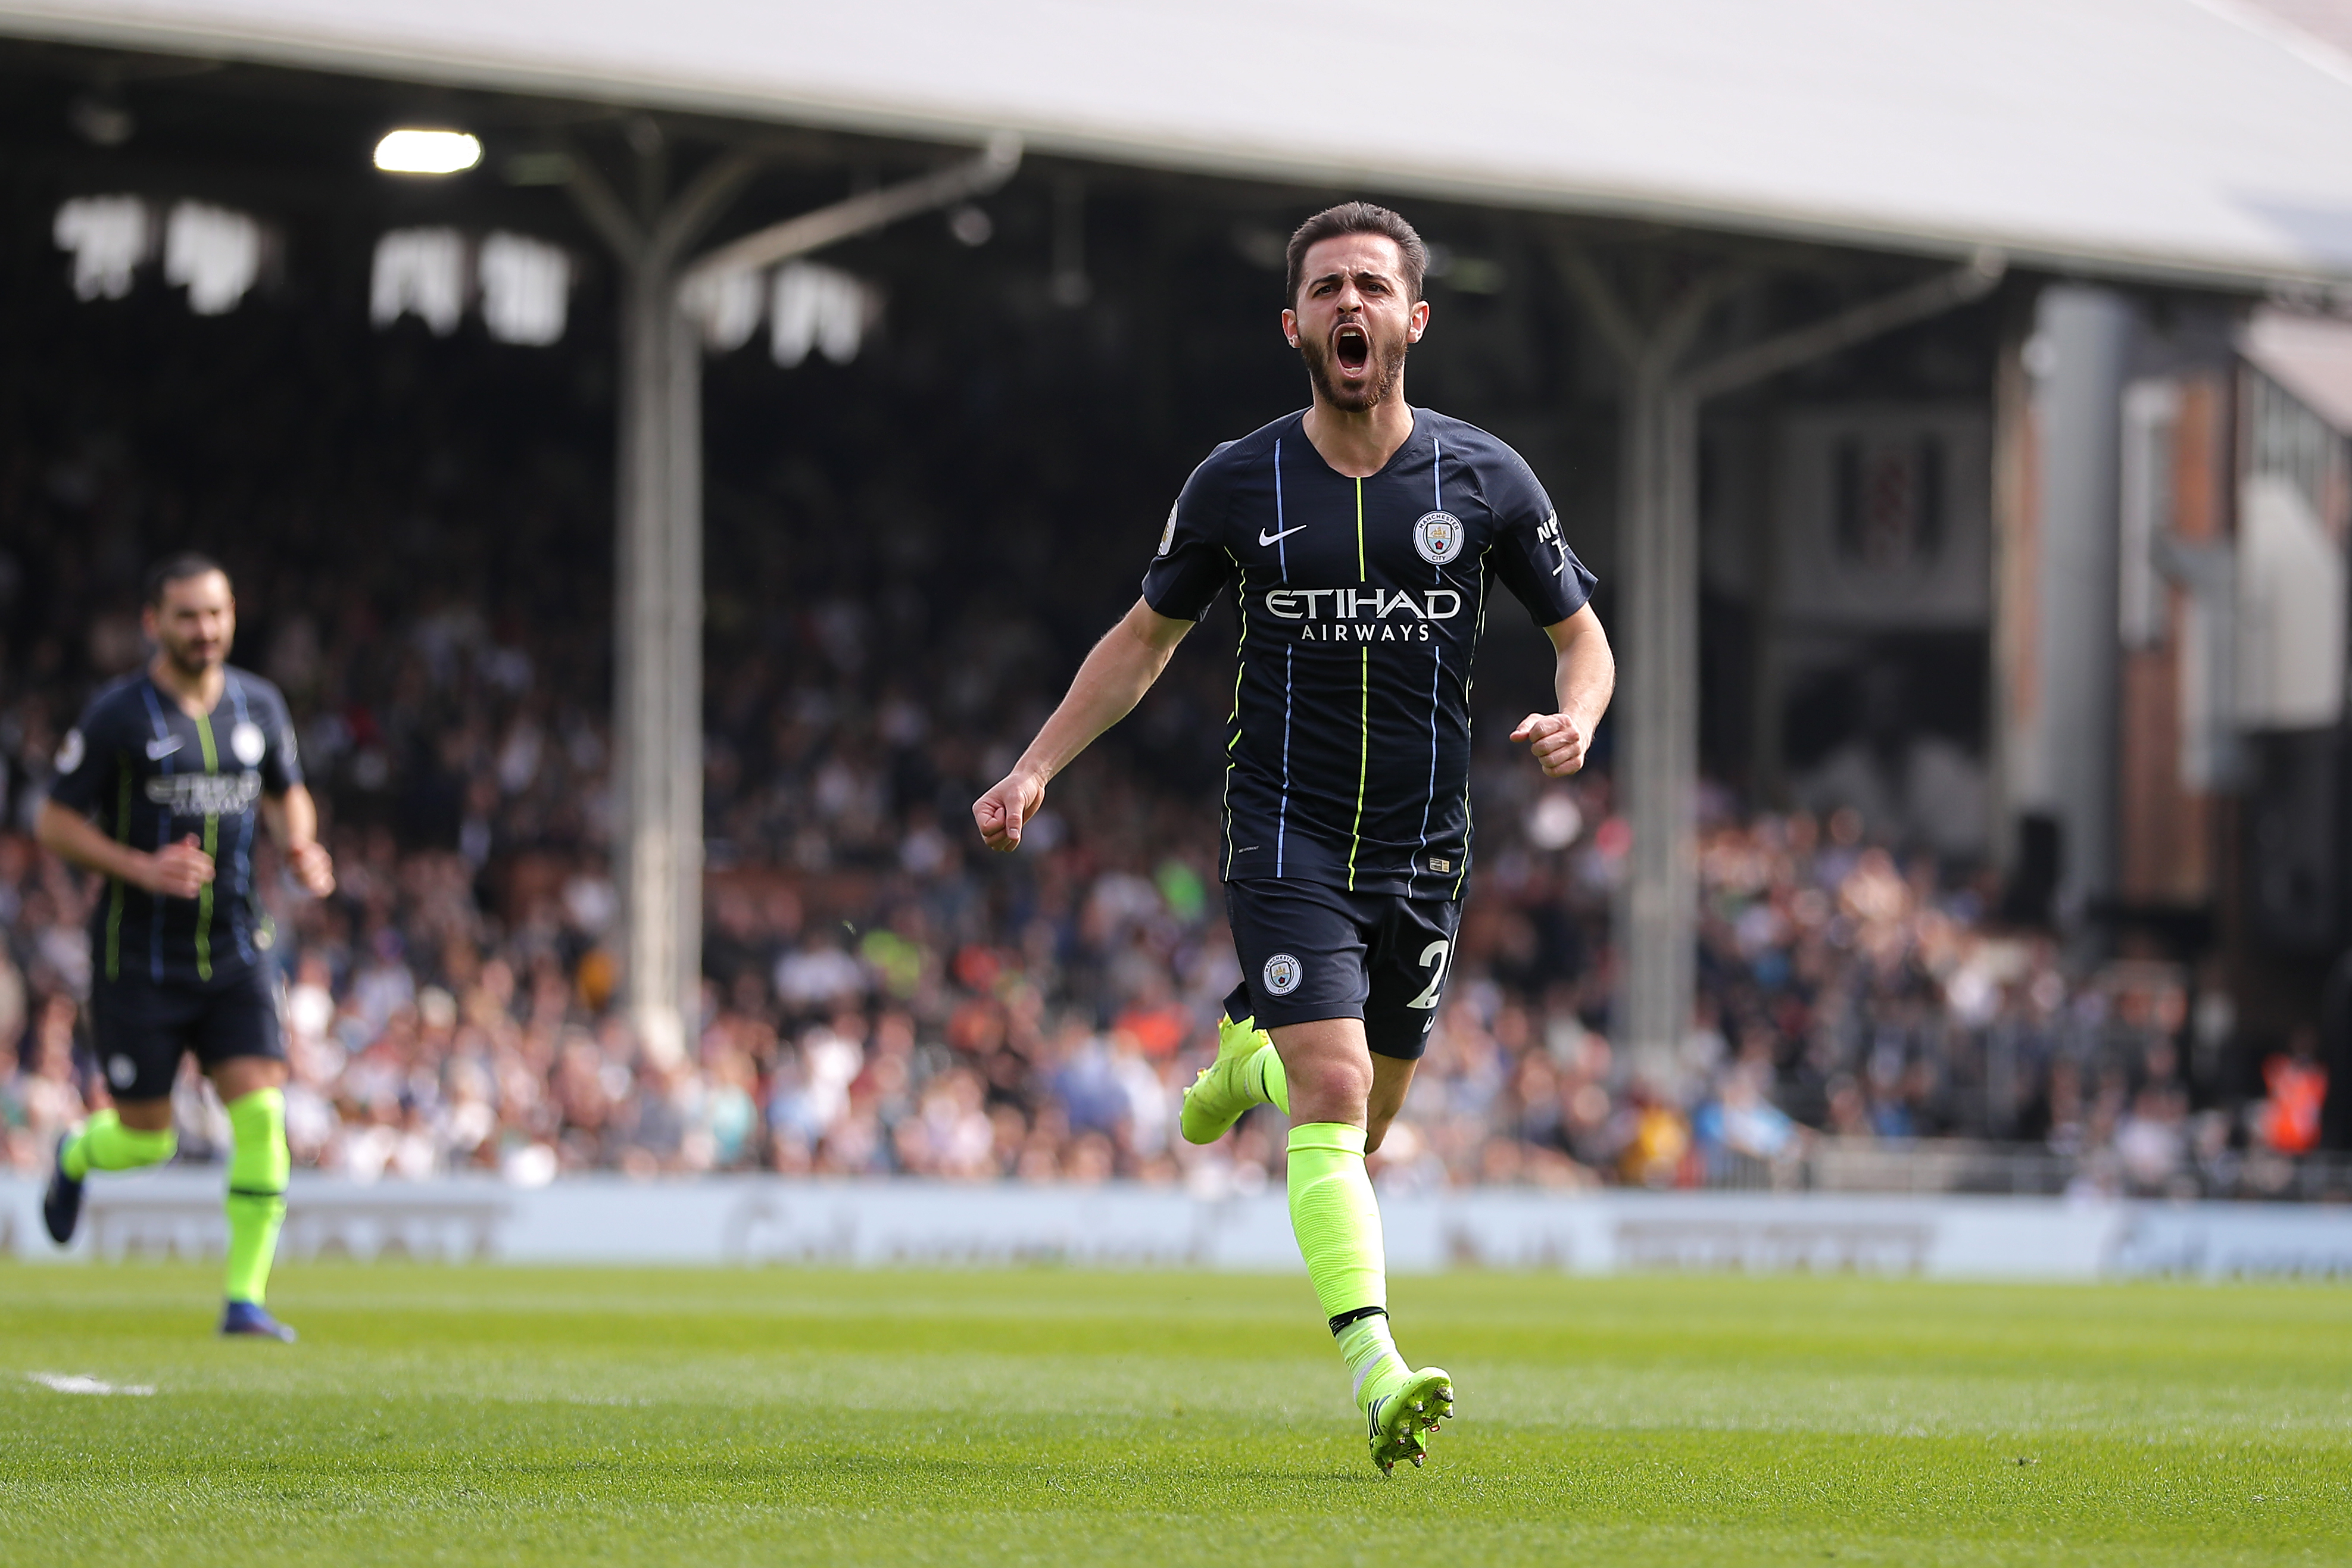 Serie A giants AC Milan remain keen on securing Manchester City star Bernardo Silva and are targeting him in the January transfer window